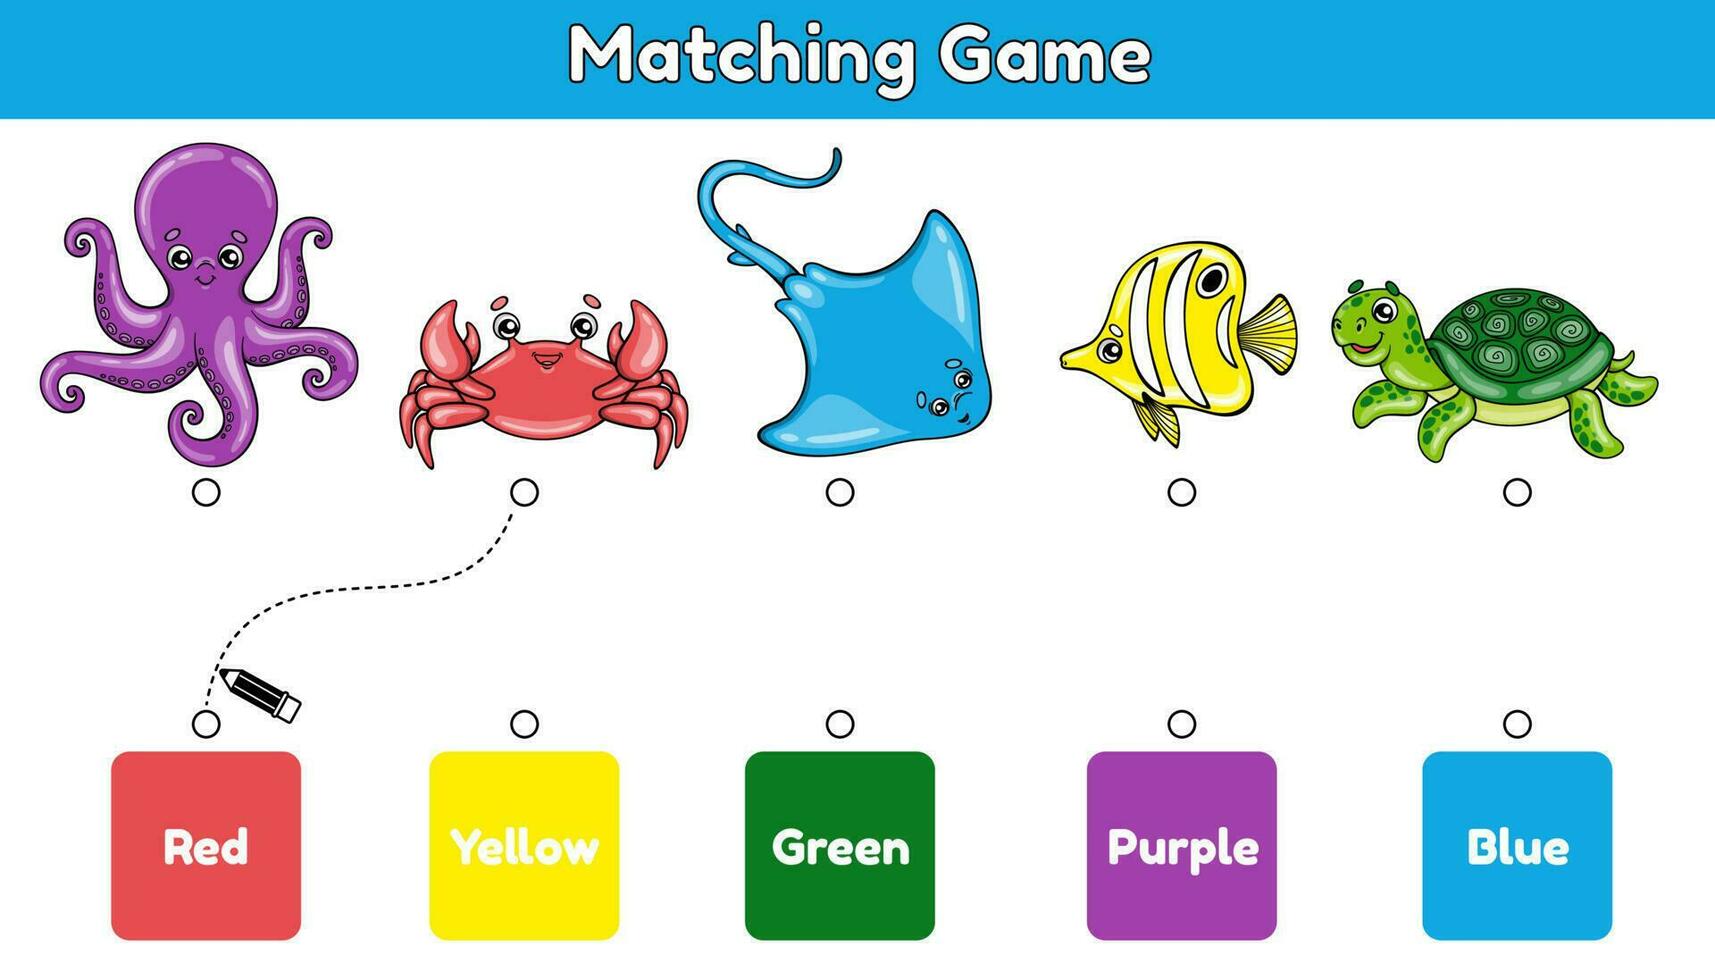 Matching educational game for children. Match sea animals and colors.  Activity for kids. Worksheet for preschool and school education. Vector cartoon cute octopus, crab, stingray, fish and turtle.